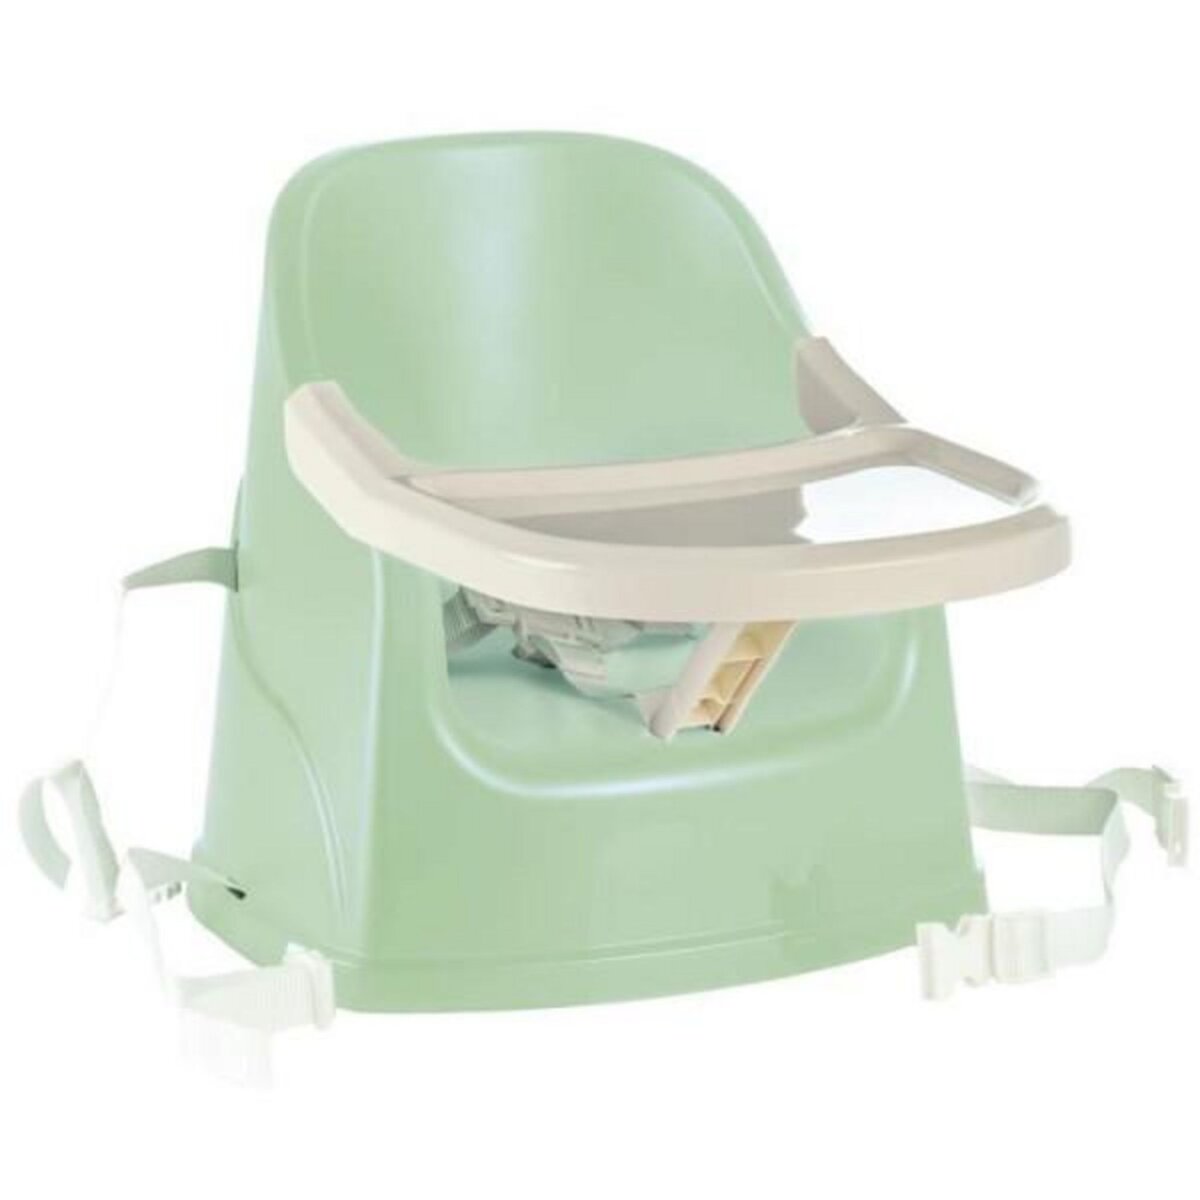 THERMOBABY Rehausseur de chaise - Ananas